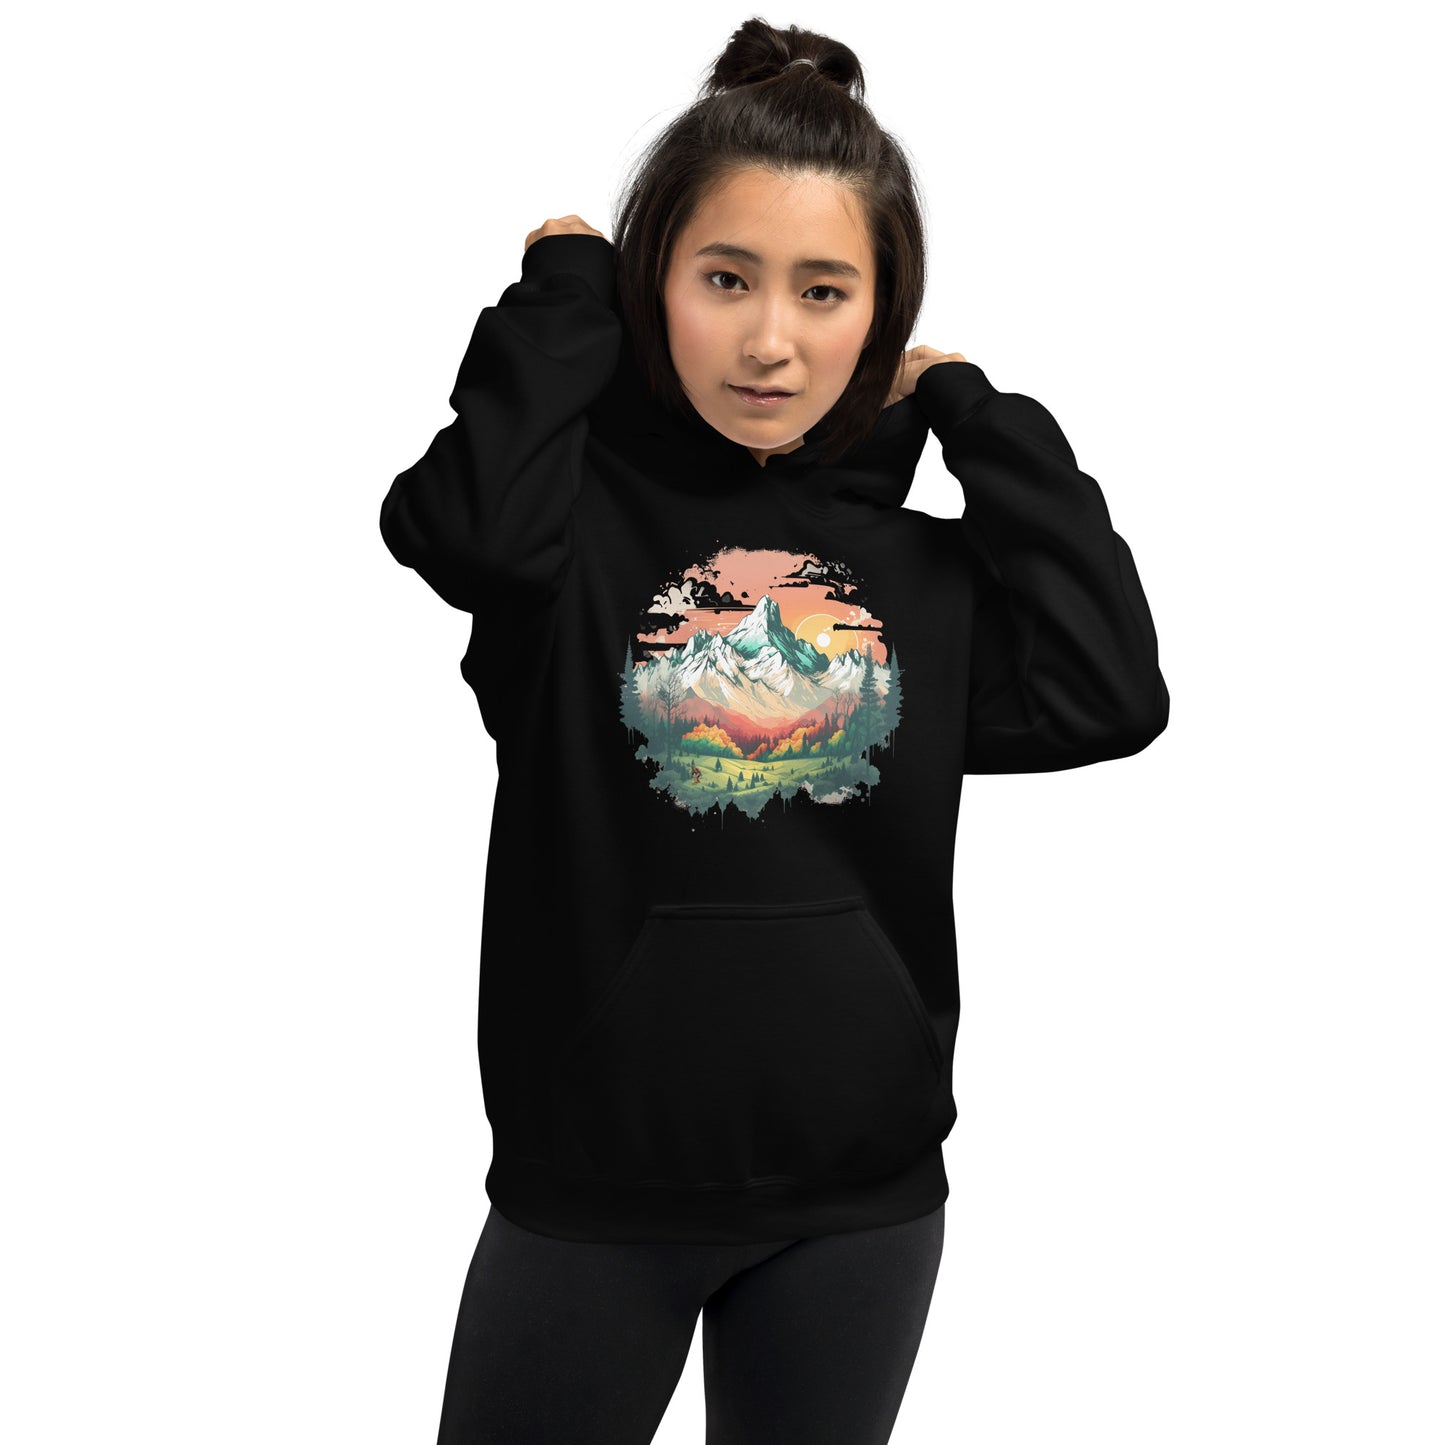 The Great Outdoors Unisex Hoodie